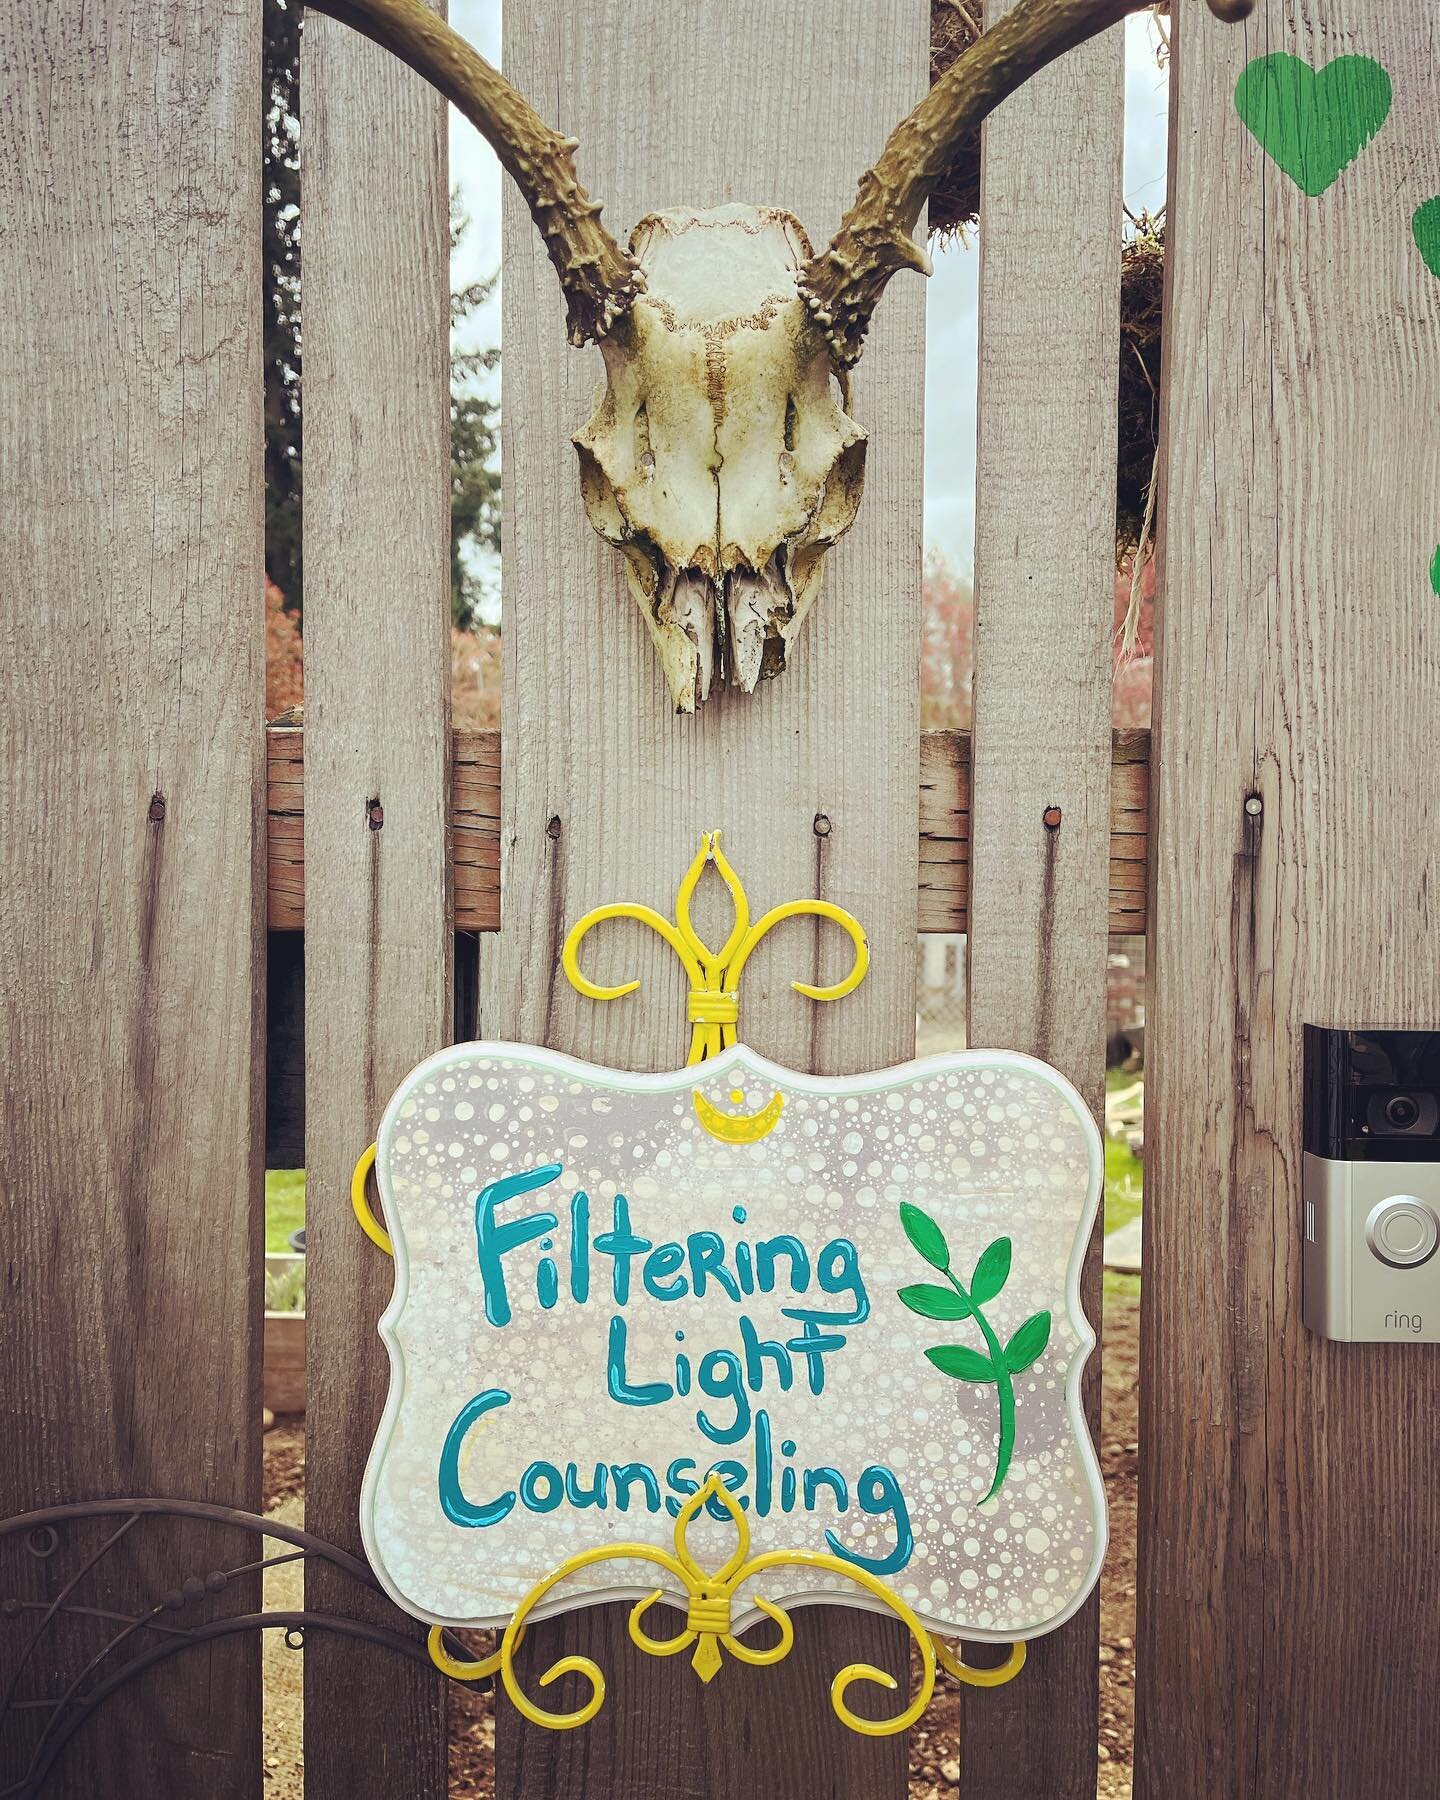 Ding dong! Tomorrow is the opening day for the ecotherapy backyard office and #filteringlightcounseling! [ID a fence holds a deer skull and below it is a sign that Kim painted that says Filtering Light Counseling with a RING doorbell to the right]